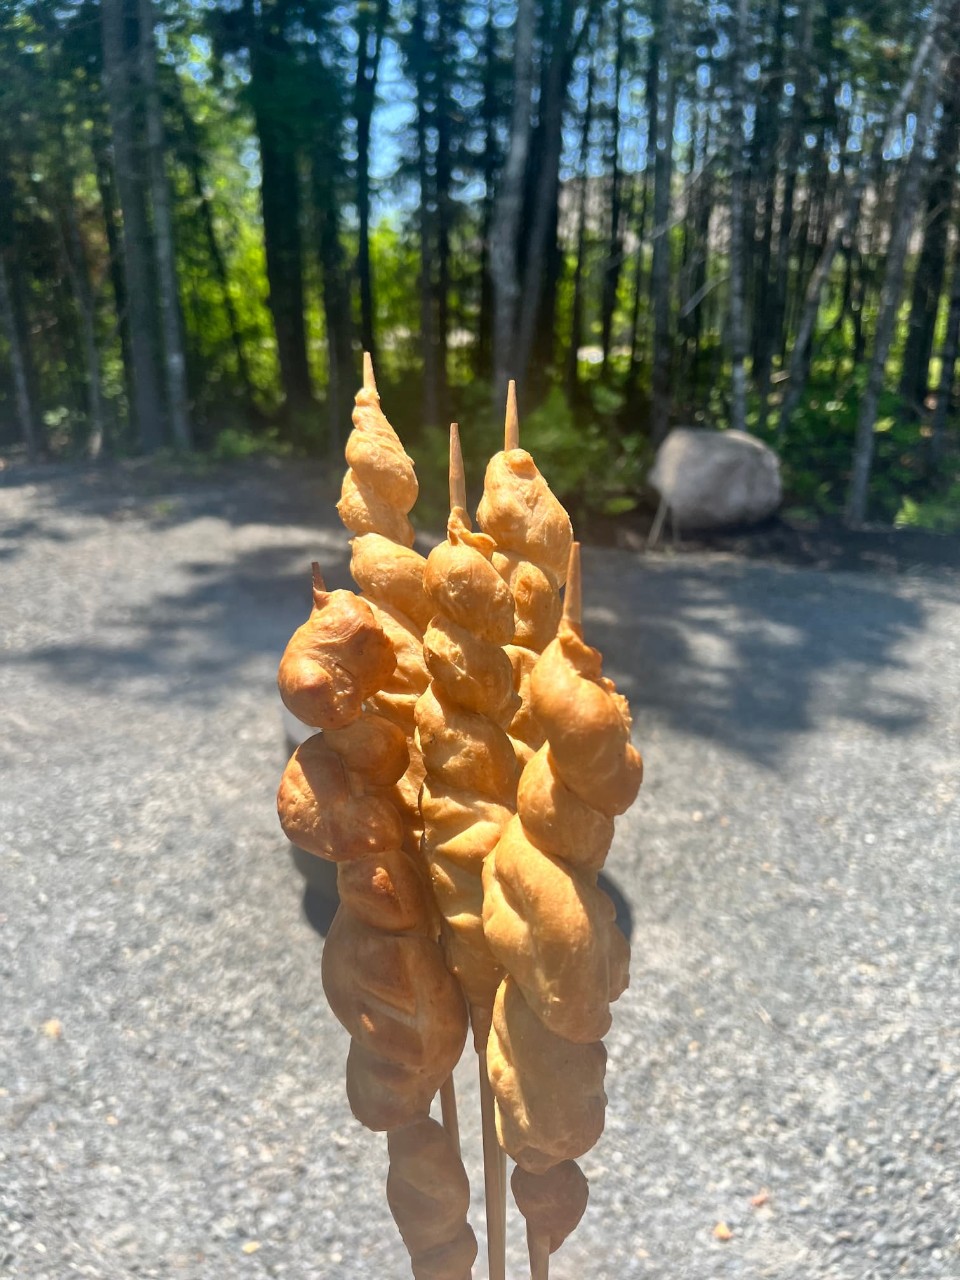 Cooked bannock in an open outdoor area